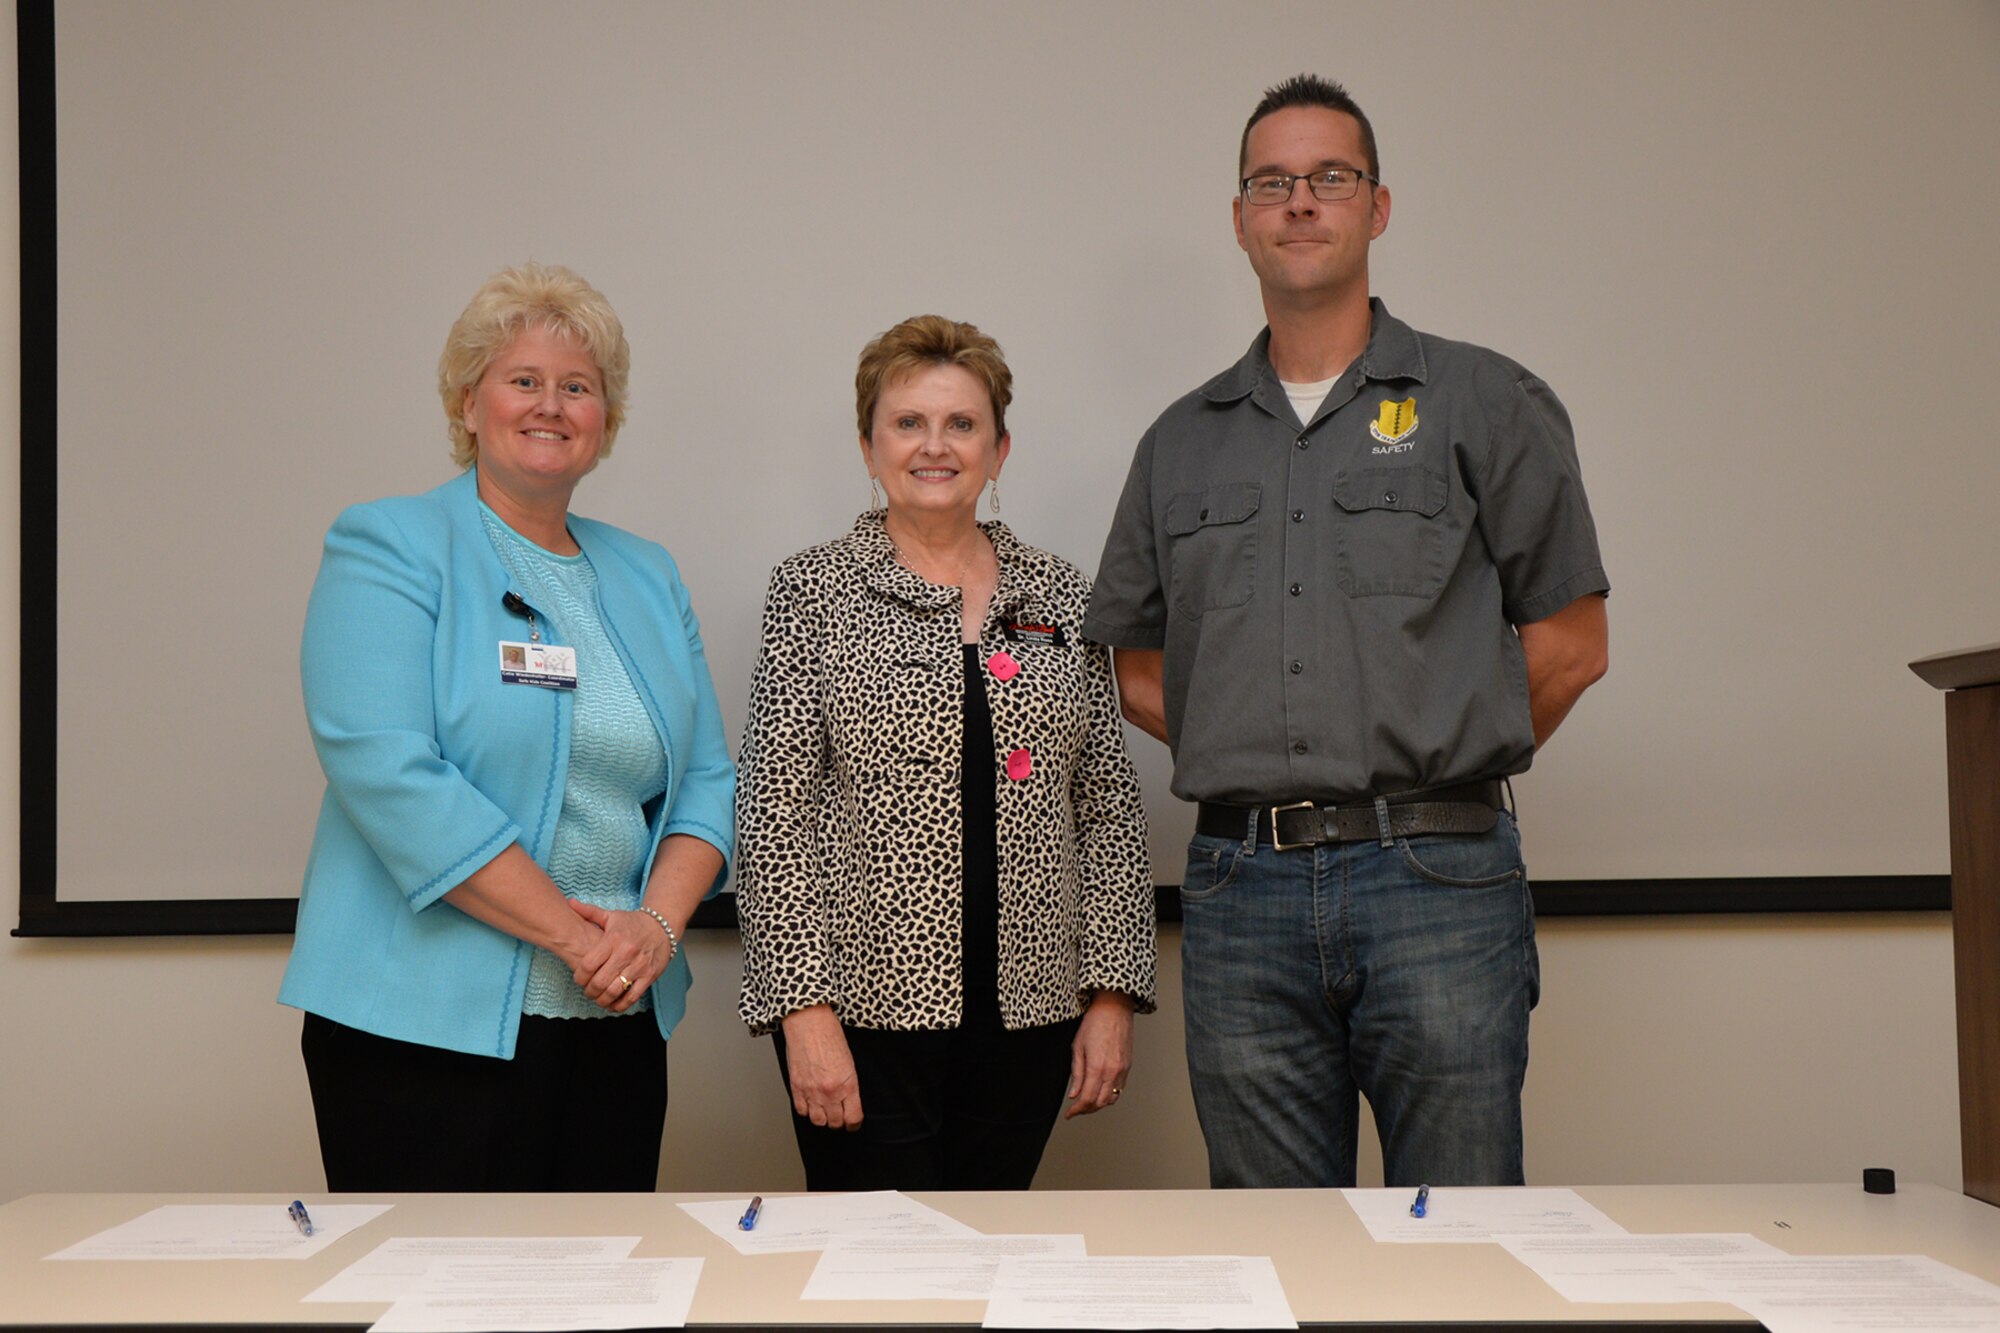 Catie G. Wiedenhofer, Safe Kids San Angelo coordinator; Dr. Linda C. Ross, Laura W. Bush Institute for Women’s Health director; and Neil Townley, 17th Training Wing Safety chief, sign Memorandums of Understanding at the Devon Energy office in San Angelo, Texas, April 20, 2016.  The purpose of the Sharing Vehicles, Mechanics and Technicians MOU is to provide guidance and outline responsibilities regarding the City of San Angelo and the 17th Logistics Readiness Squadron’s sharing of resources for fire truck repair and ambulance service.  (U.S. Air Force photo by Airman 1st Class Randall A.S. Moose/Released) 